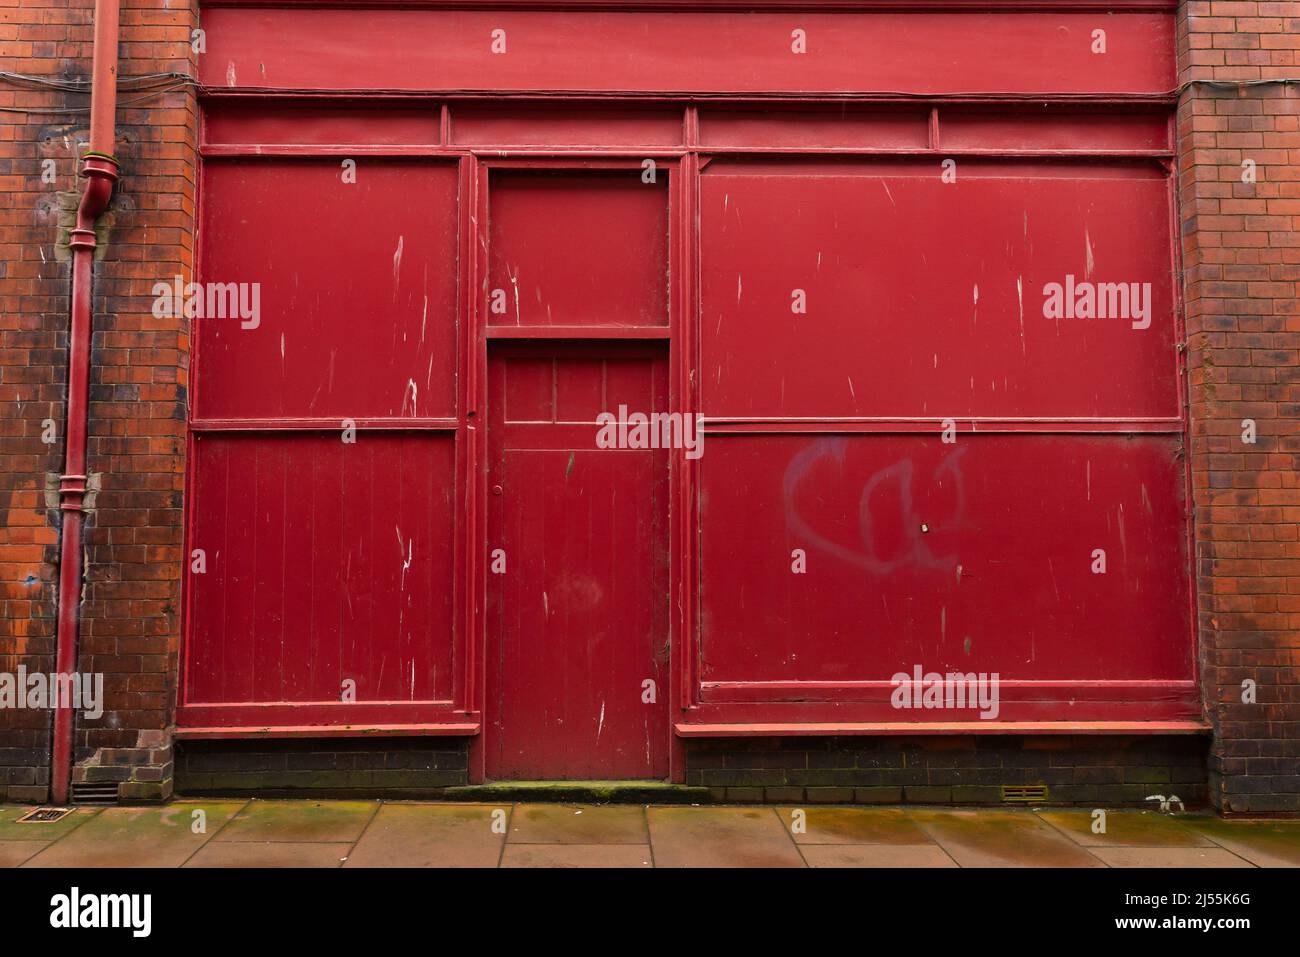 Red industrial doors on old brick building in English city. Carlisle, England. Stock Photo